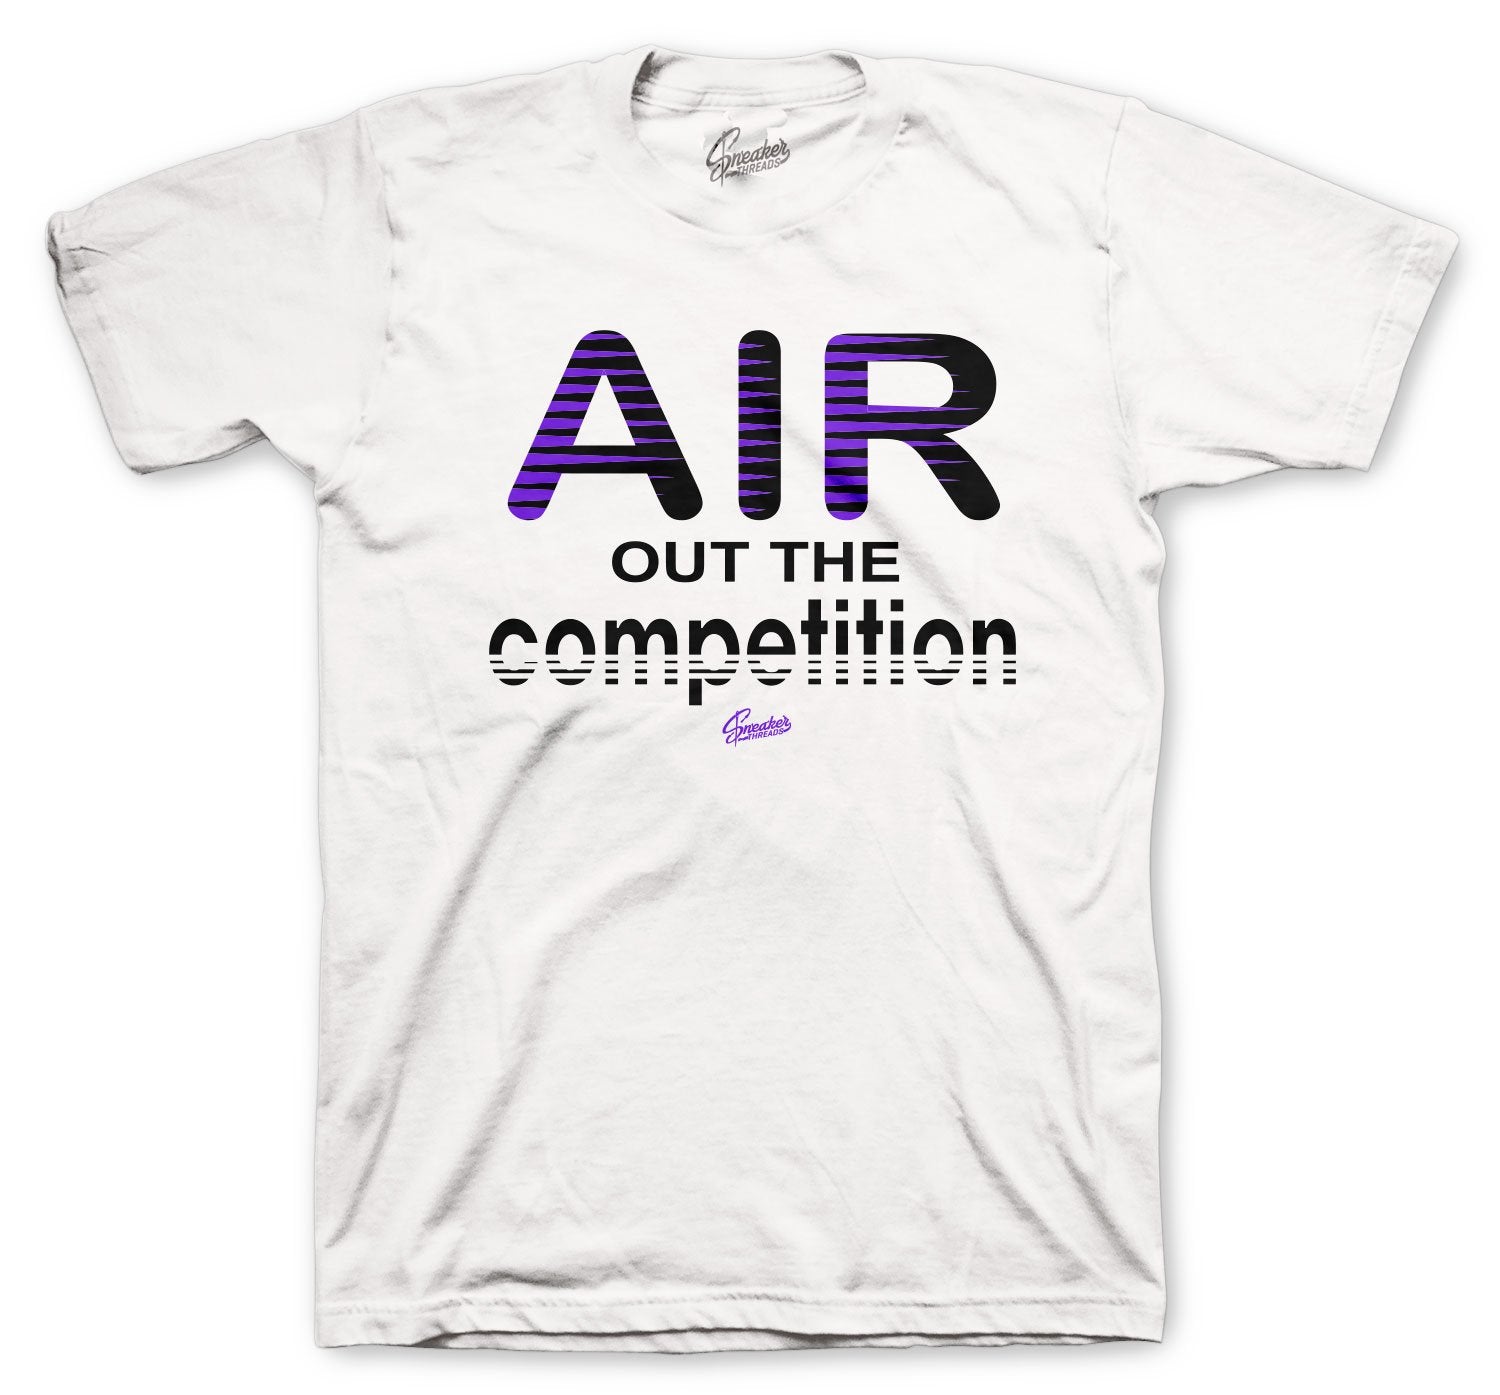 white shirt collection has matching sneaker collection air max hyper grape 90s